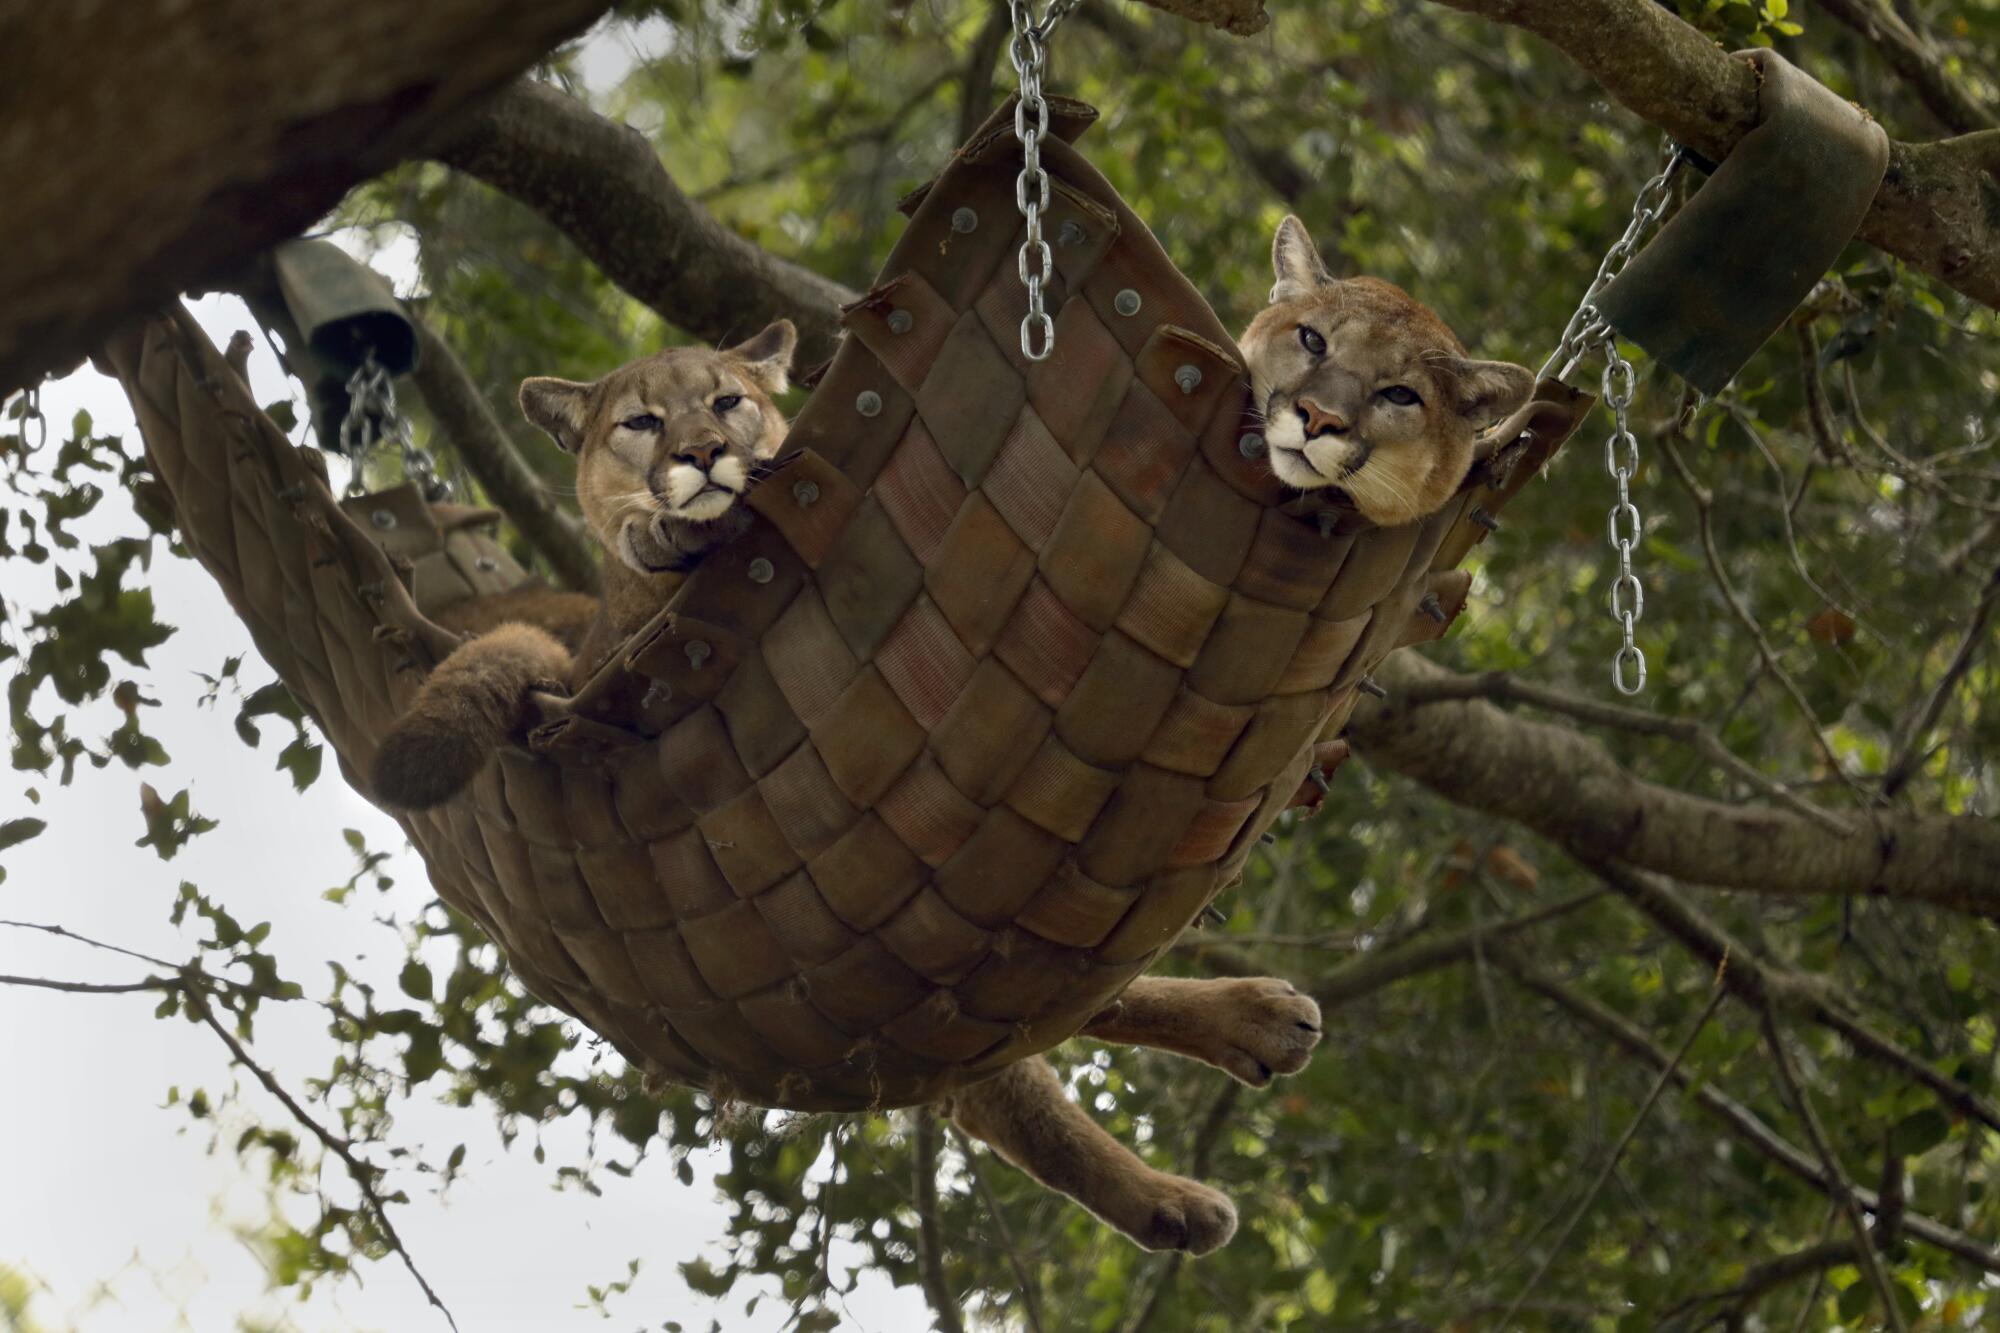 Two mountain lions hang together in a hammock at the Oakland Zoo